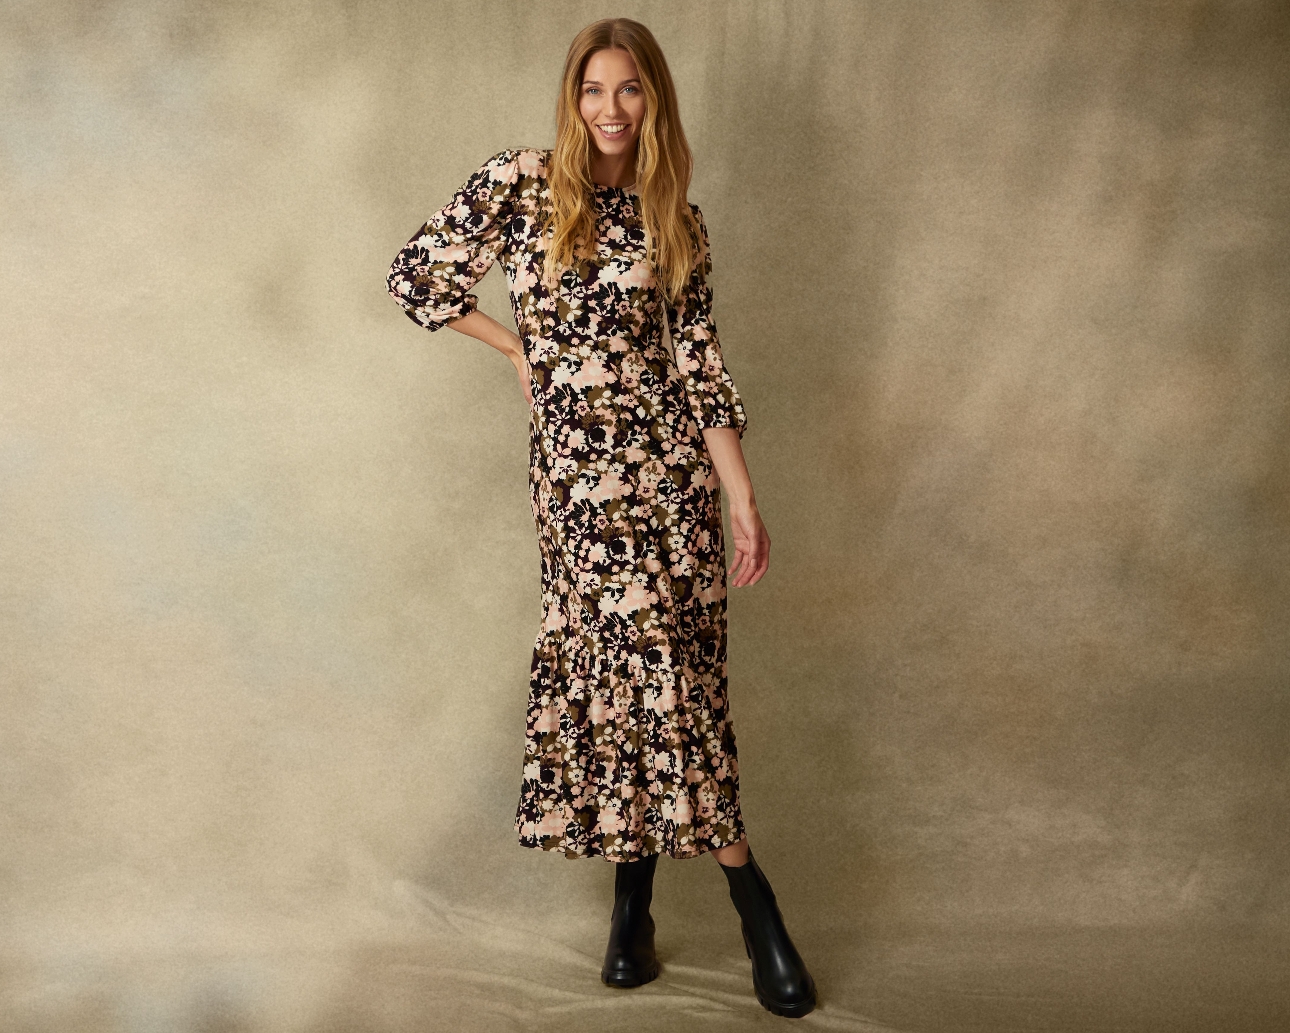 woman in floral dress long sleeves and black boots